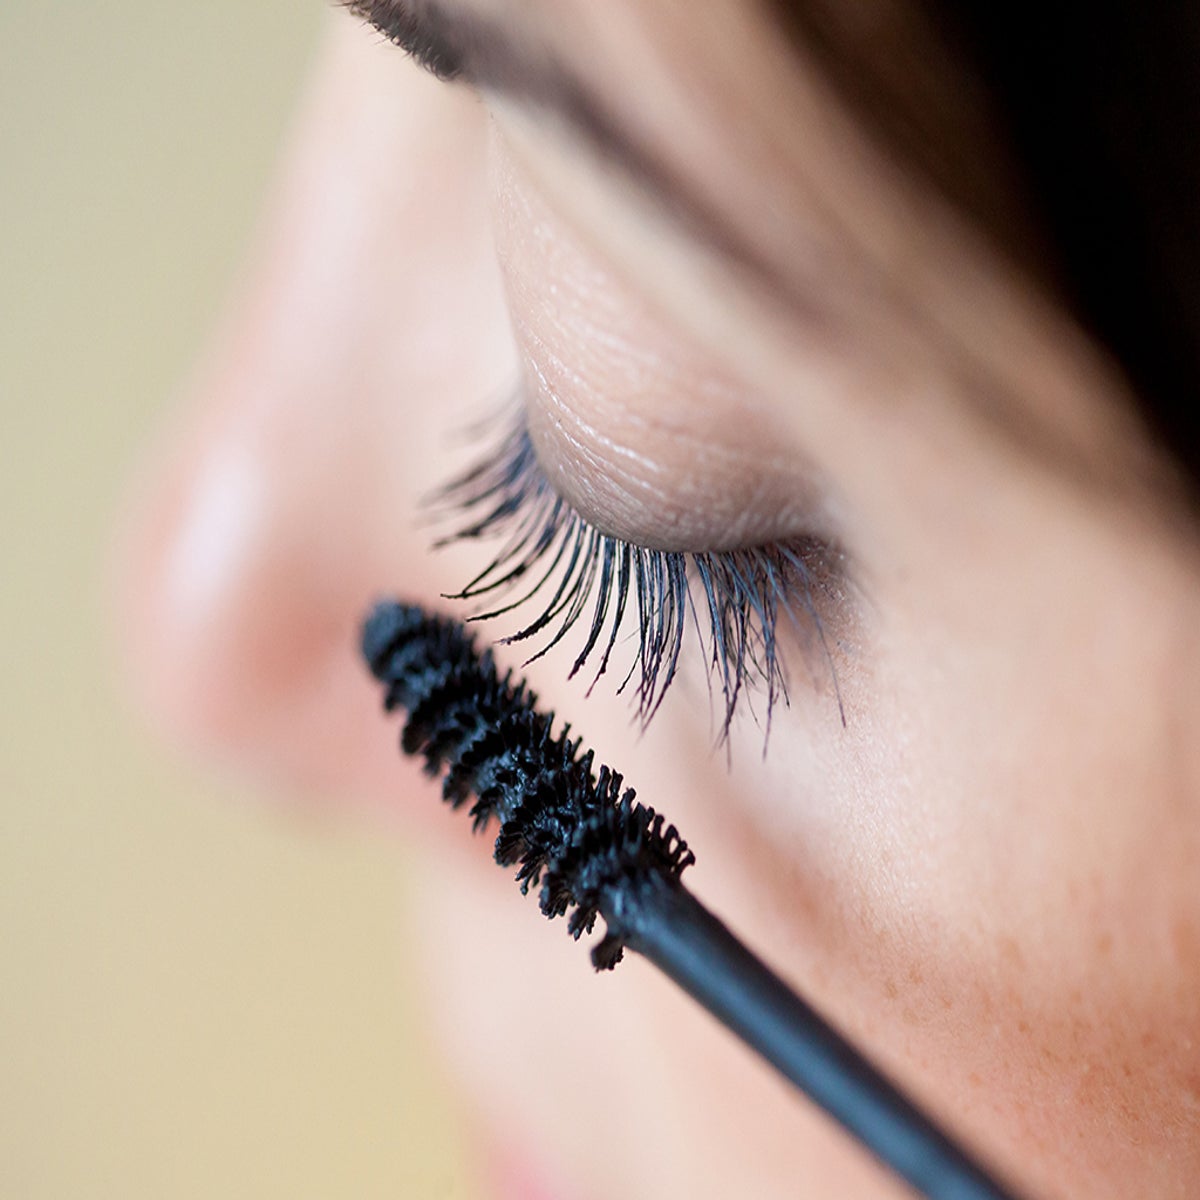 7 ways make-up can harm eyes | The Independent |